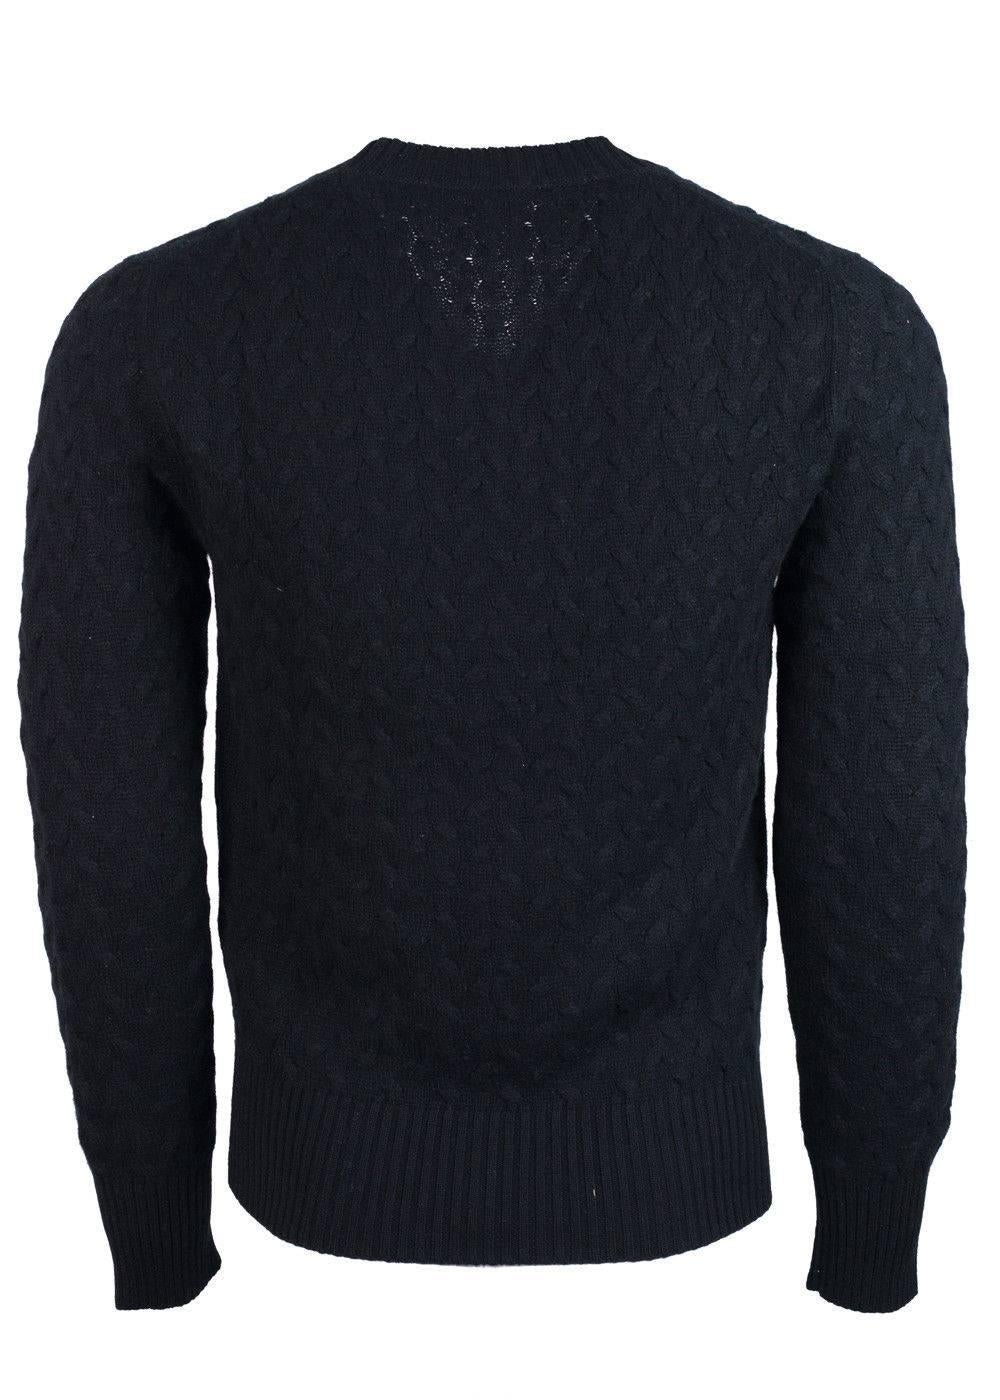 Tom Ford Black Cashmere Blend V Neck Curved Cable Knit Sweater In New Condition For Sale In Brooklyn, NY